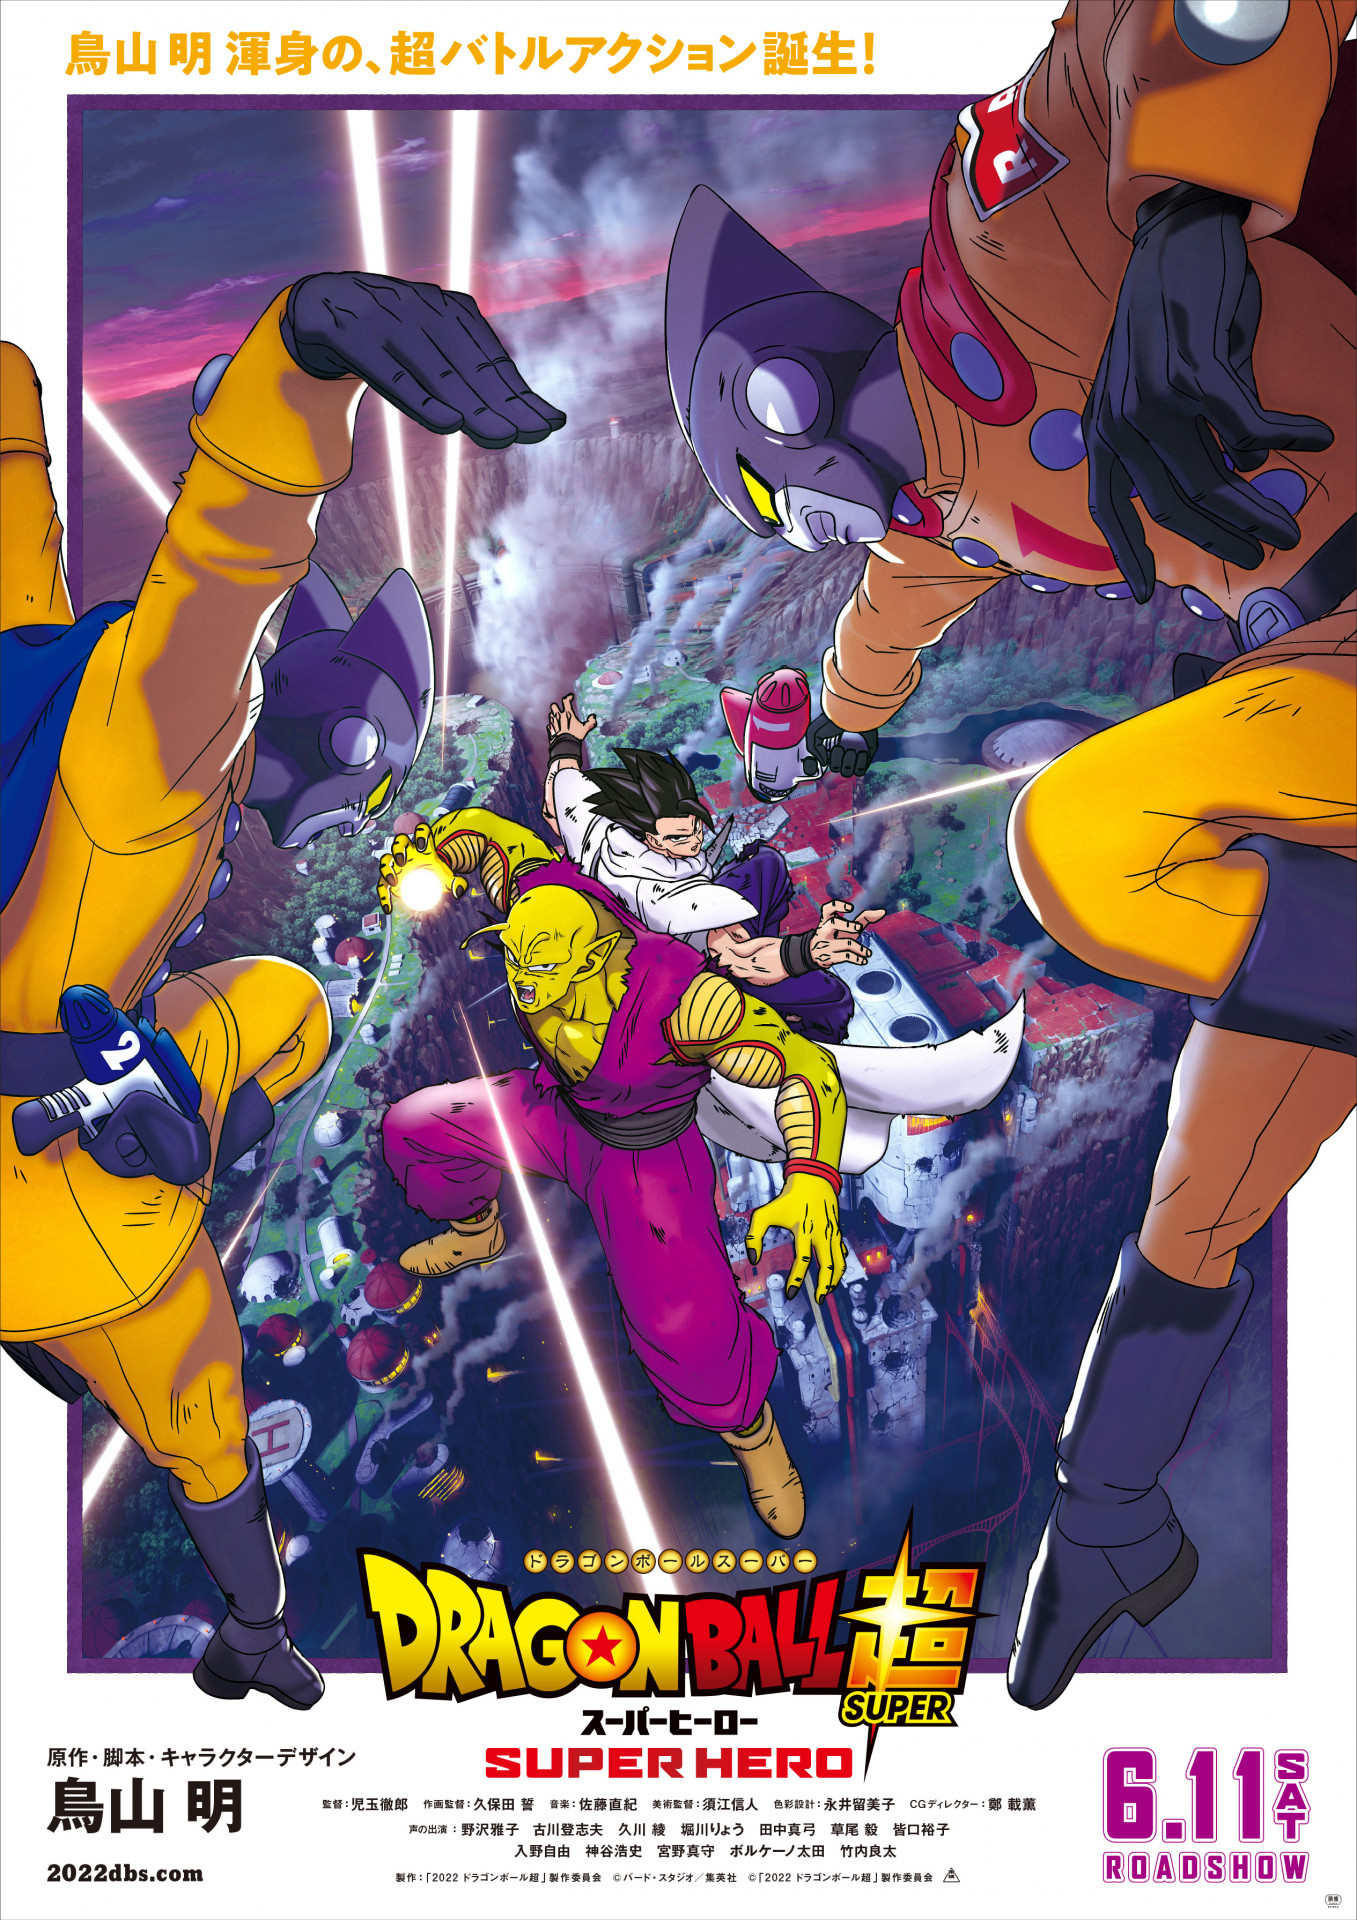 New Release Date Announcement For Dragon Ball Super Super Hero Dragon Ball Official Site